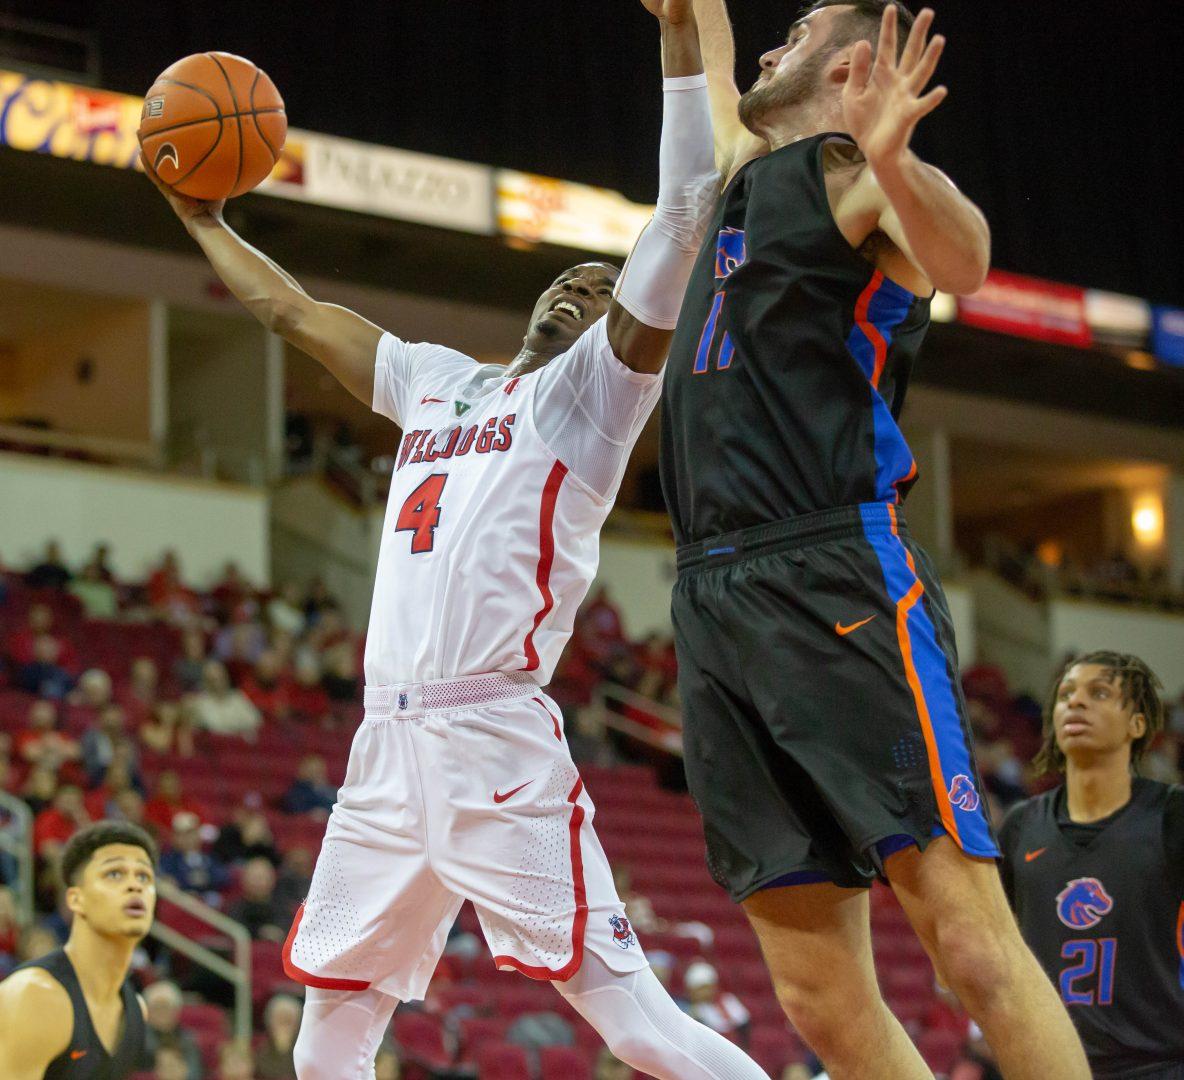 Fresno State guard Braxton Huggins goes up for a contested layup while defended by
Boise State’s Zach Haney during the Bulldogs’ 65-63 victory at the Save Mart Center on
Wednesday, Feb. 13, 2019. (Jose Romo Jr./The Collegian).